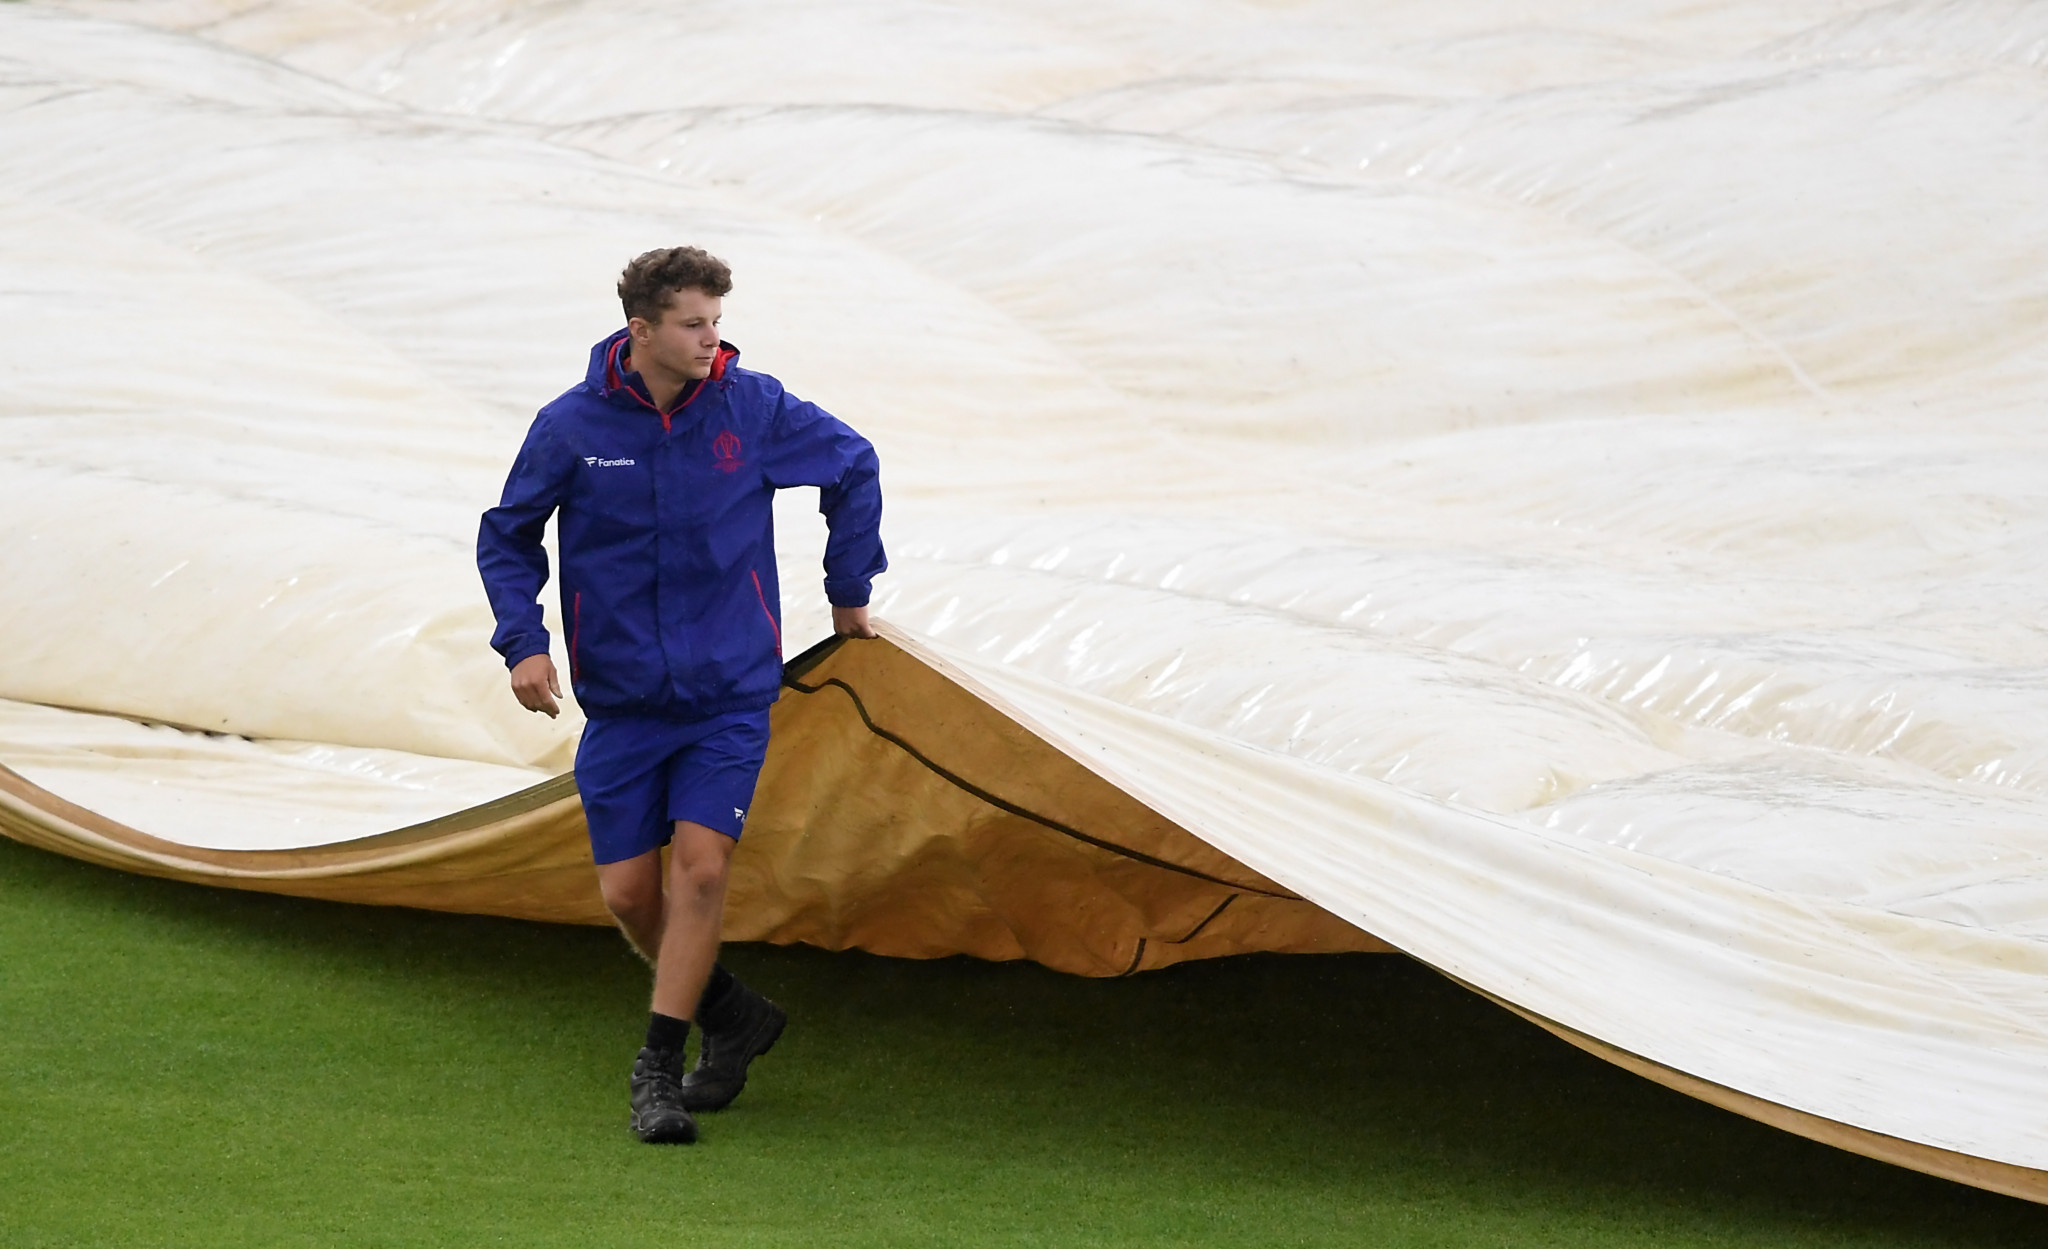 The covers briefly came off the pitch at Hampshire Bowl before the rain returned ©Getty Images